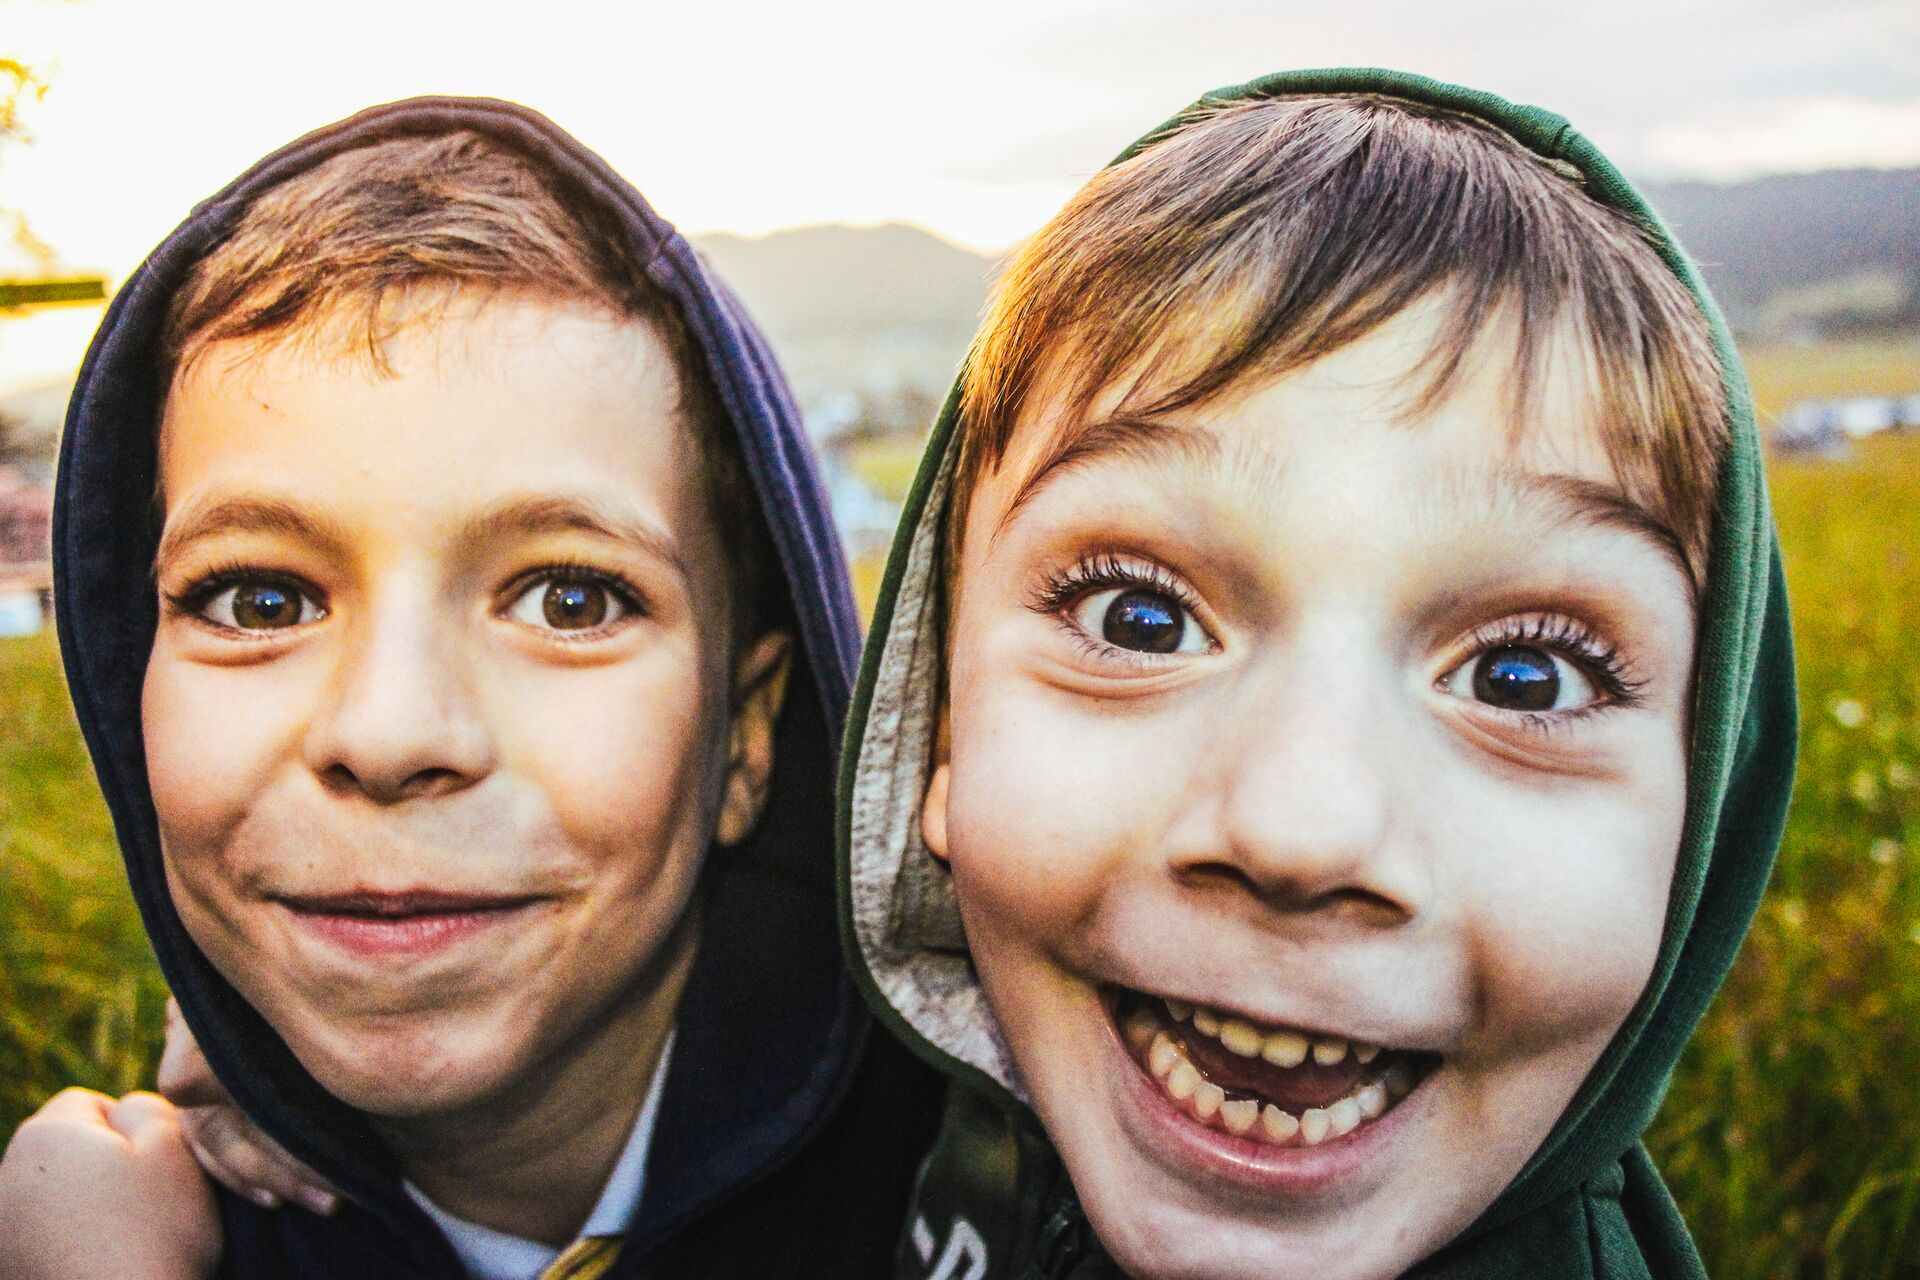 Large_MS PPT_Web-Close up of two young boys making faces to the camera .jpg